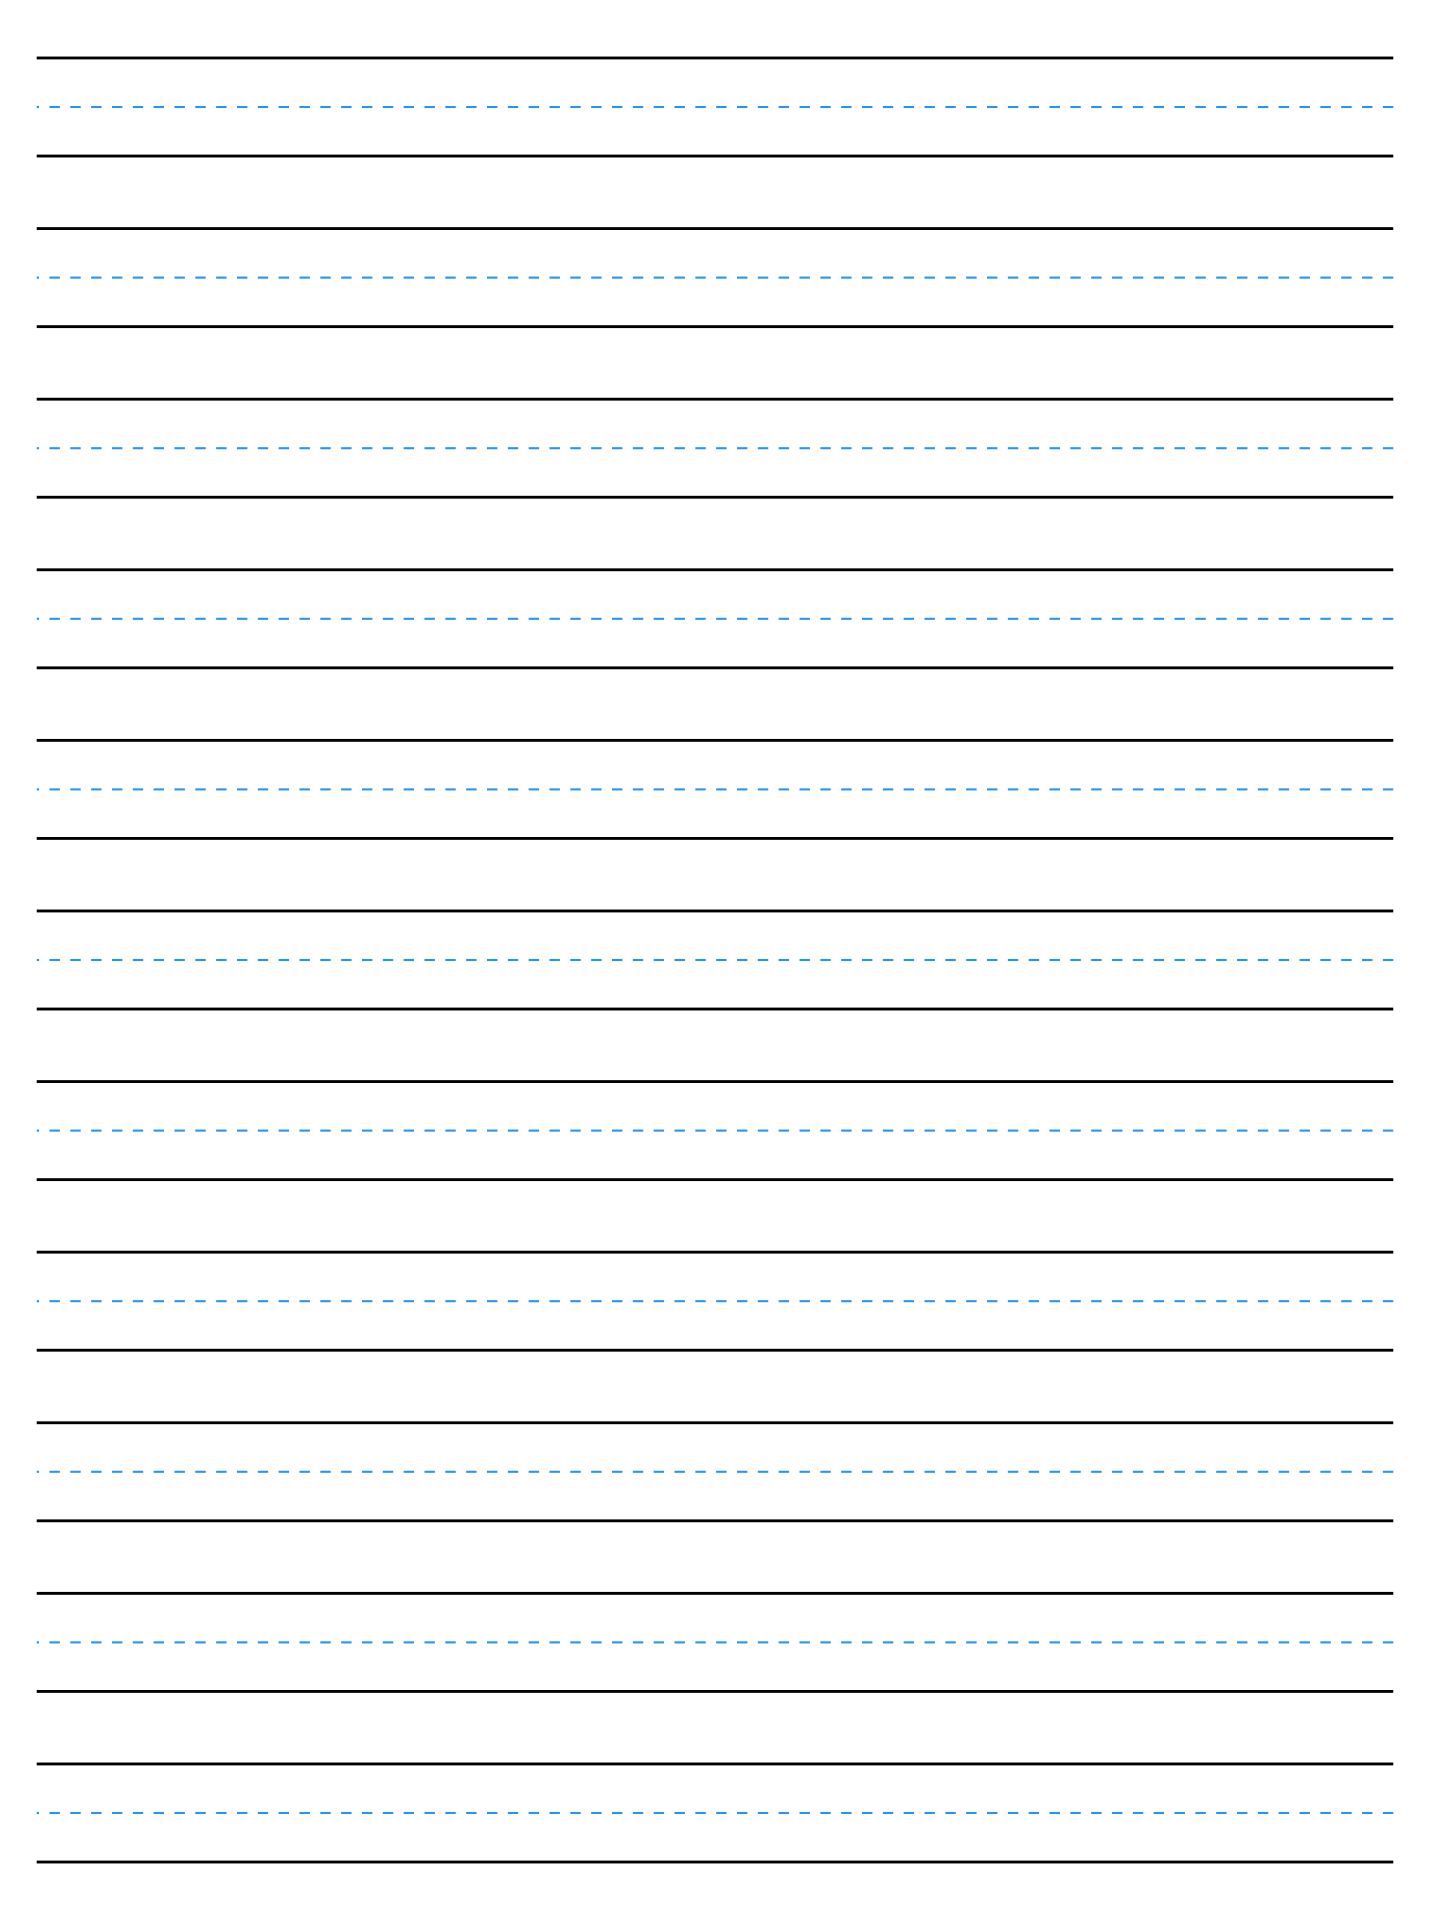 Printable Handwriting Lined Paper Template Word